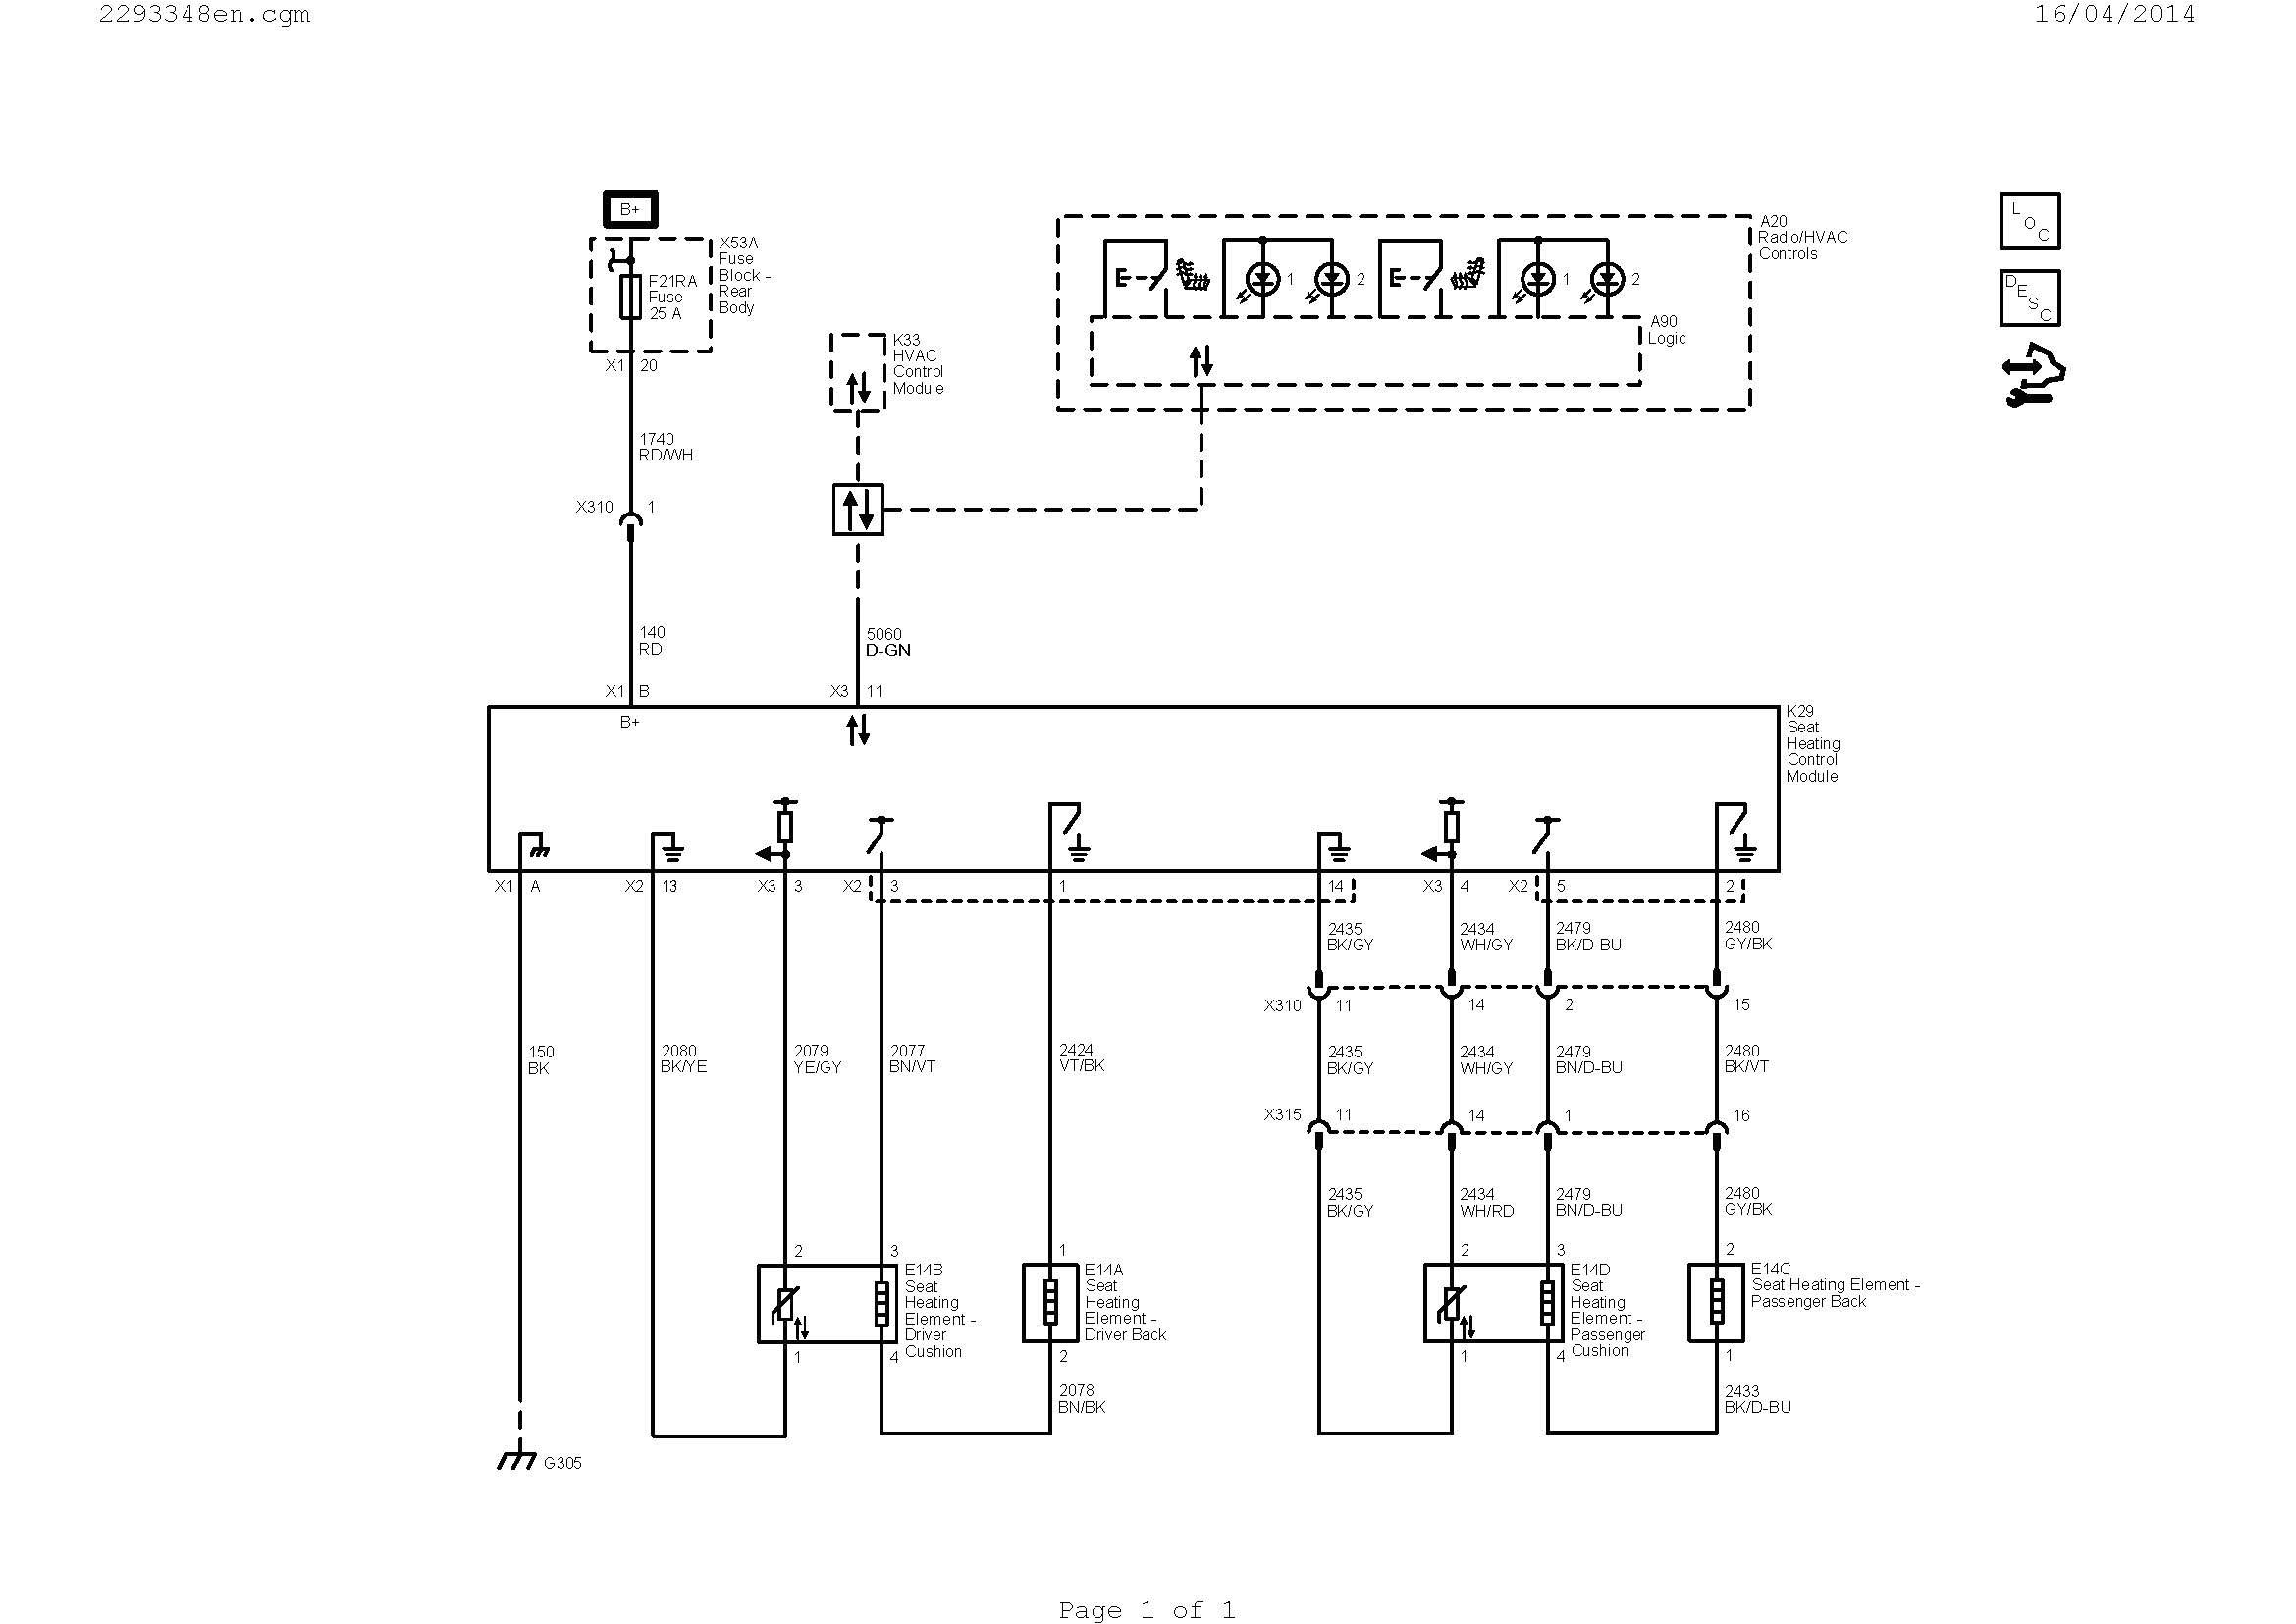 common wiring diagrams luxury electrical wiring diagram collection jpg